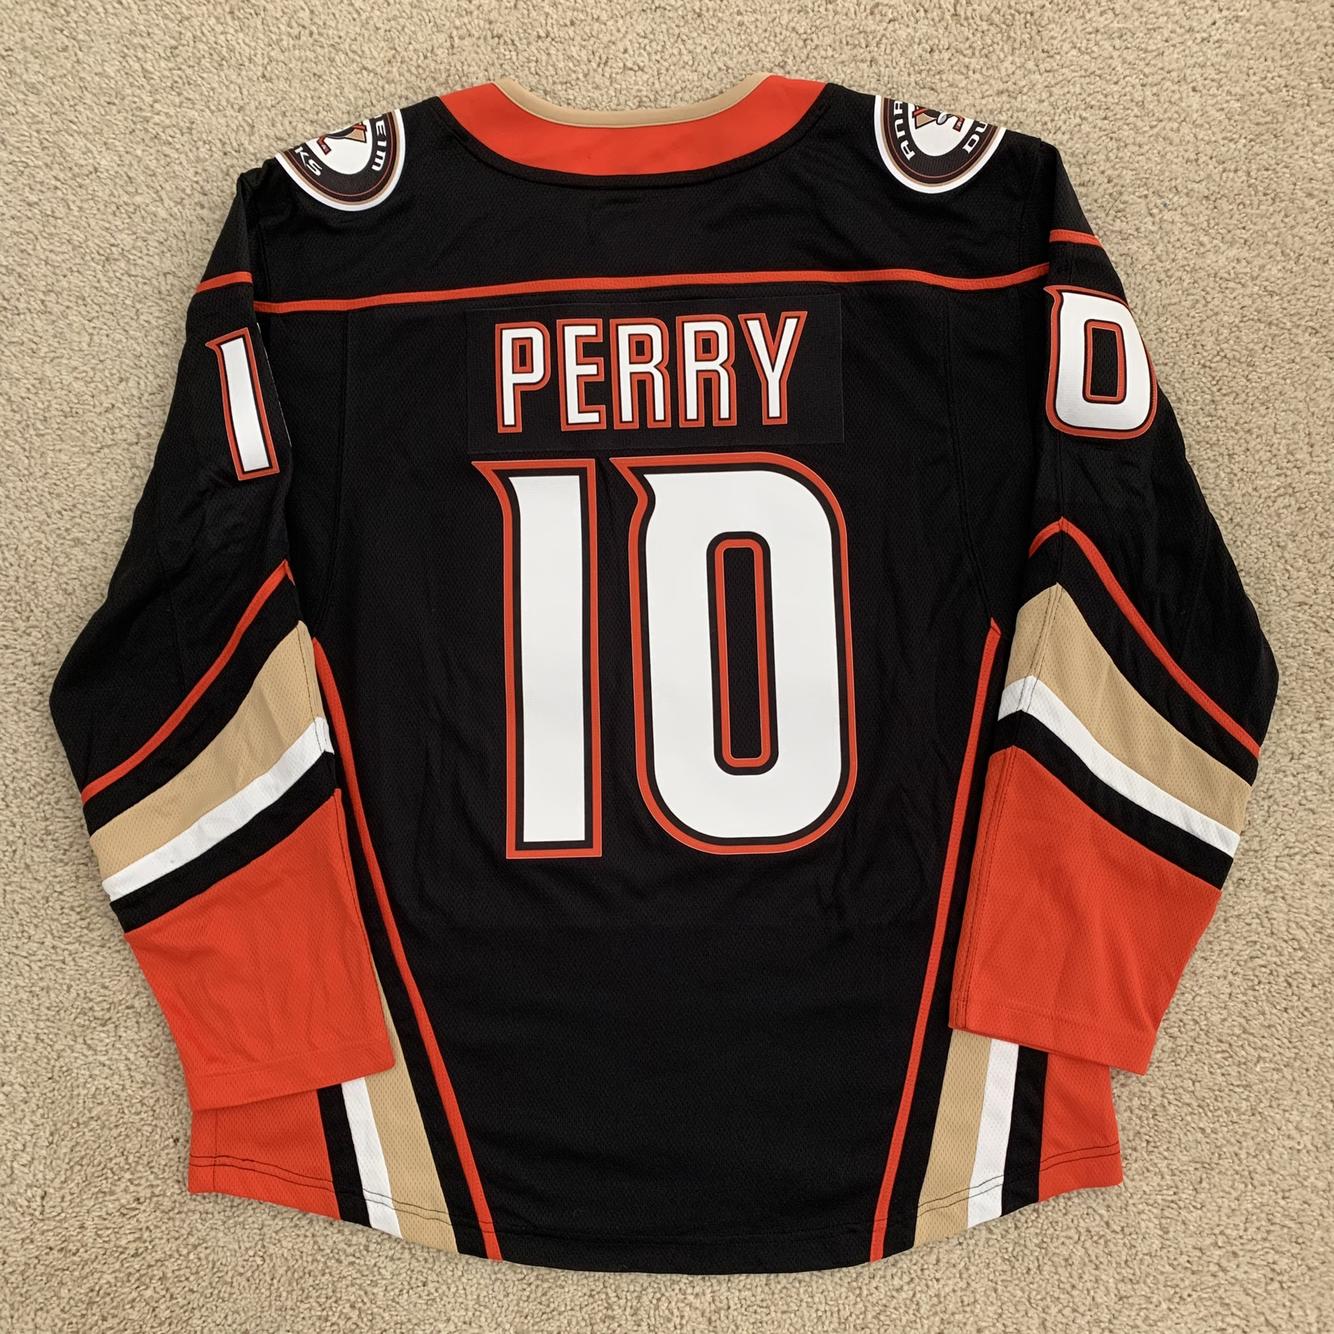 This is my favourite jersey I've bought, 25th anniversary “Silver Season”  Anaheim Ducks Adidas Authentic (: : r/hockeyjerseys